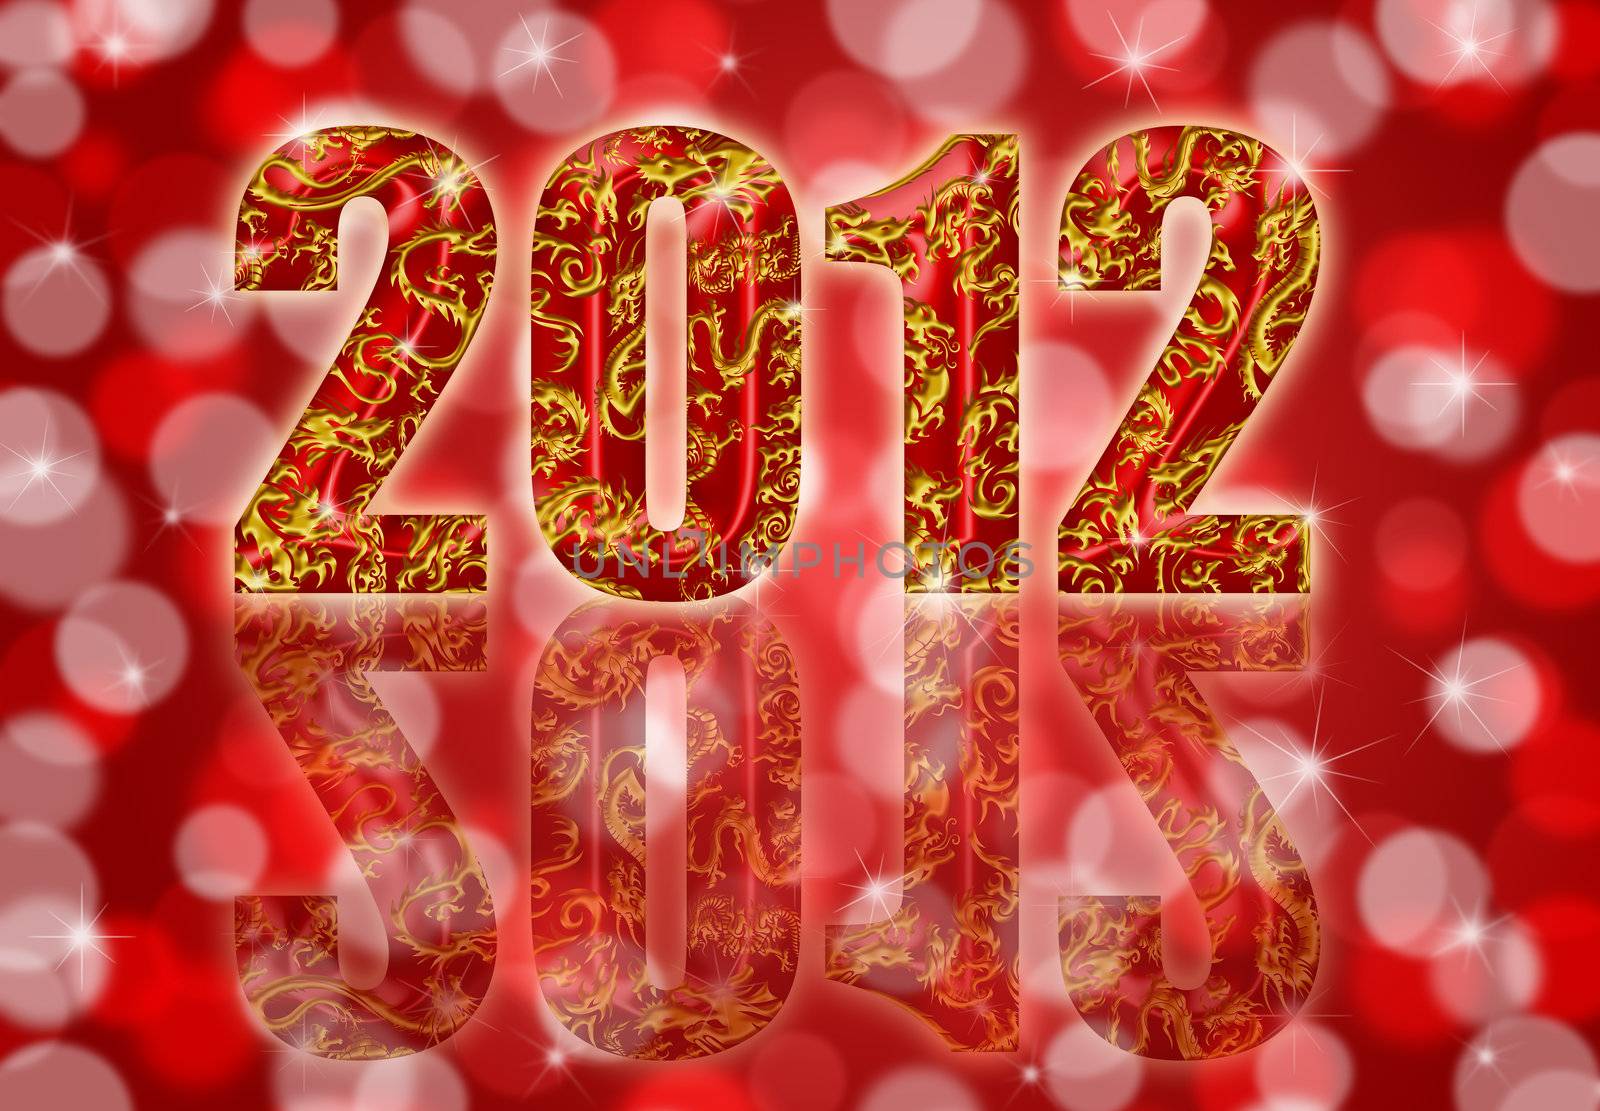 2012 Happy Chinese Year of the Dragon Design Red Blurred Background